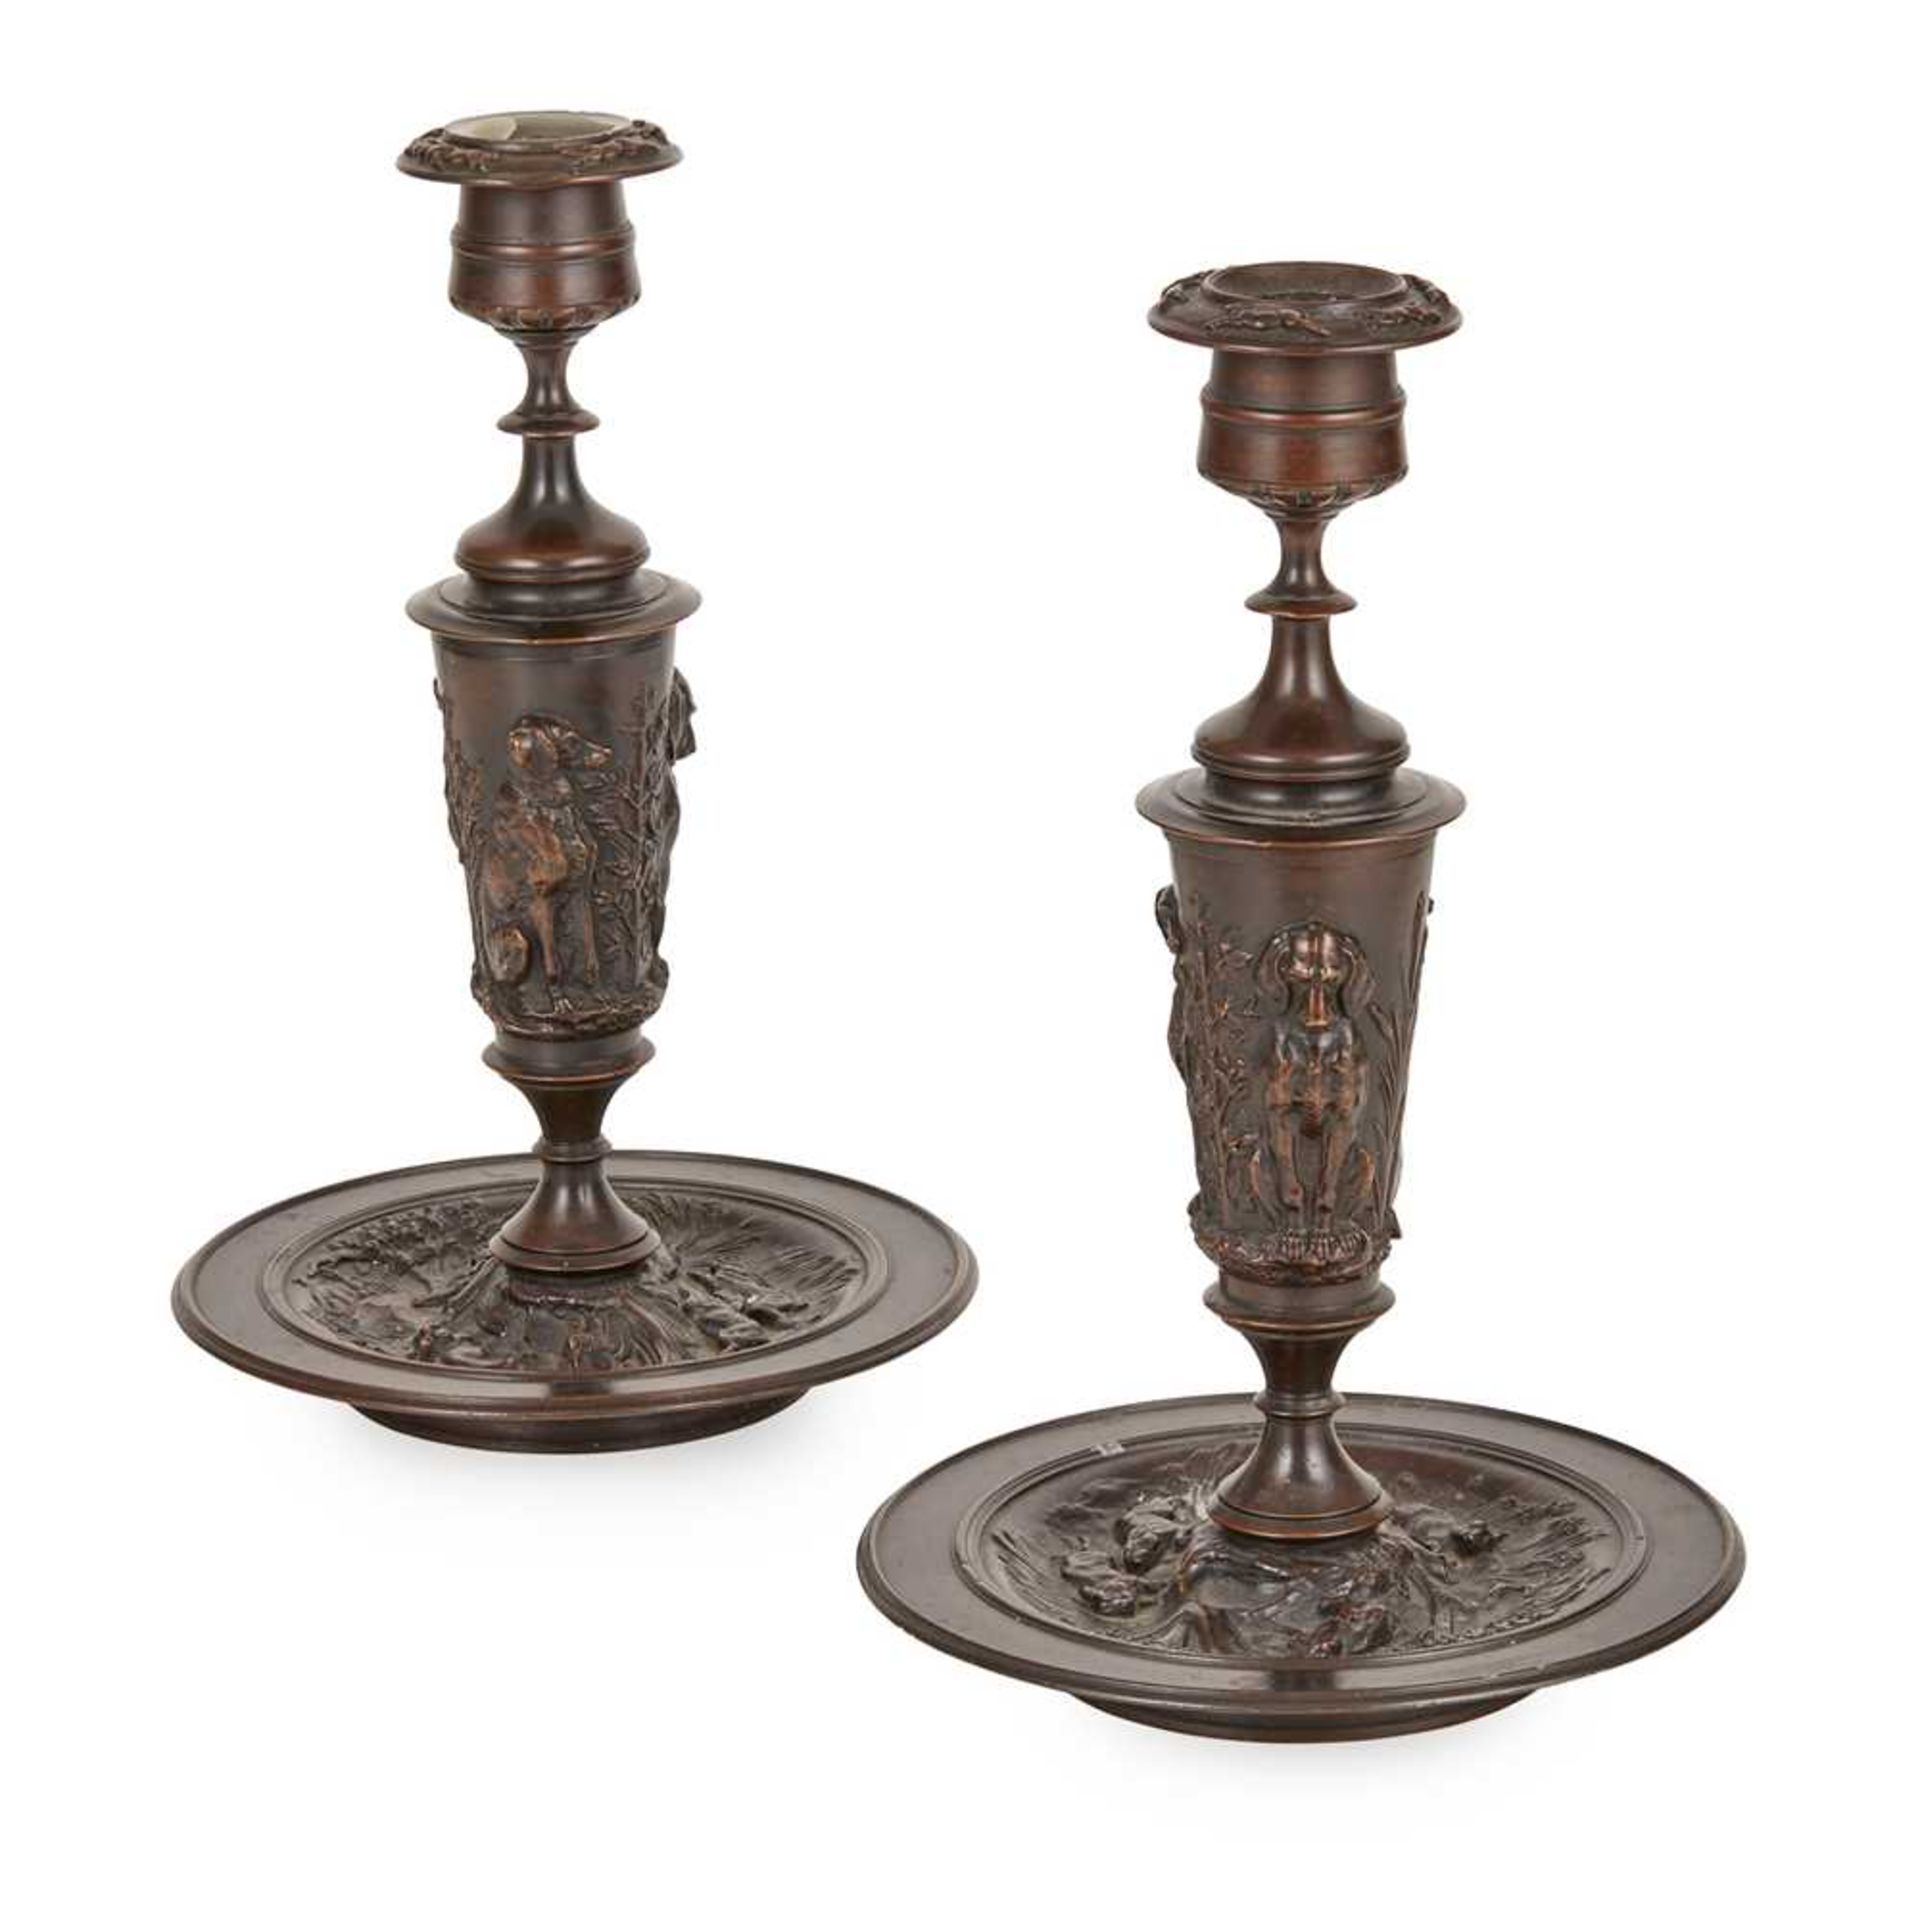 PAIR OF FRENCH BRONZE CANDLESTICKS, ATTRIBUTED TO JULES MOIGNIEZ 19TH CENTURY